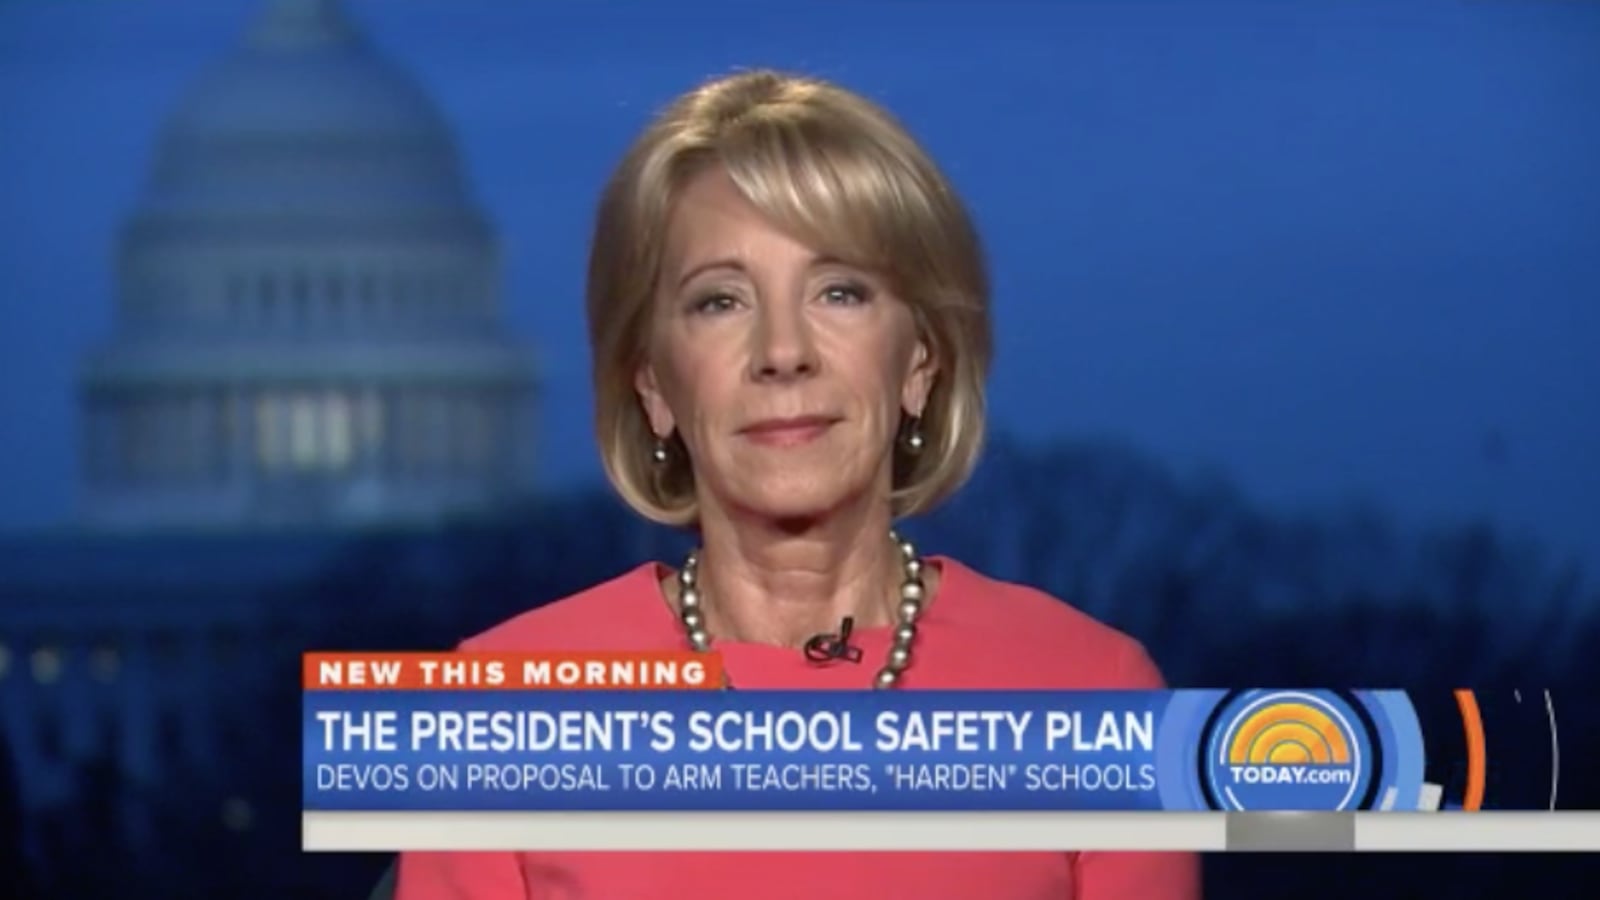 DeVos on the Today Show